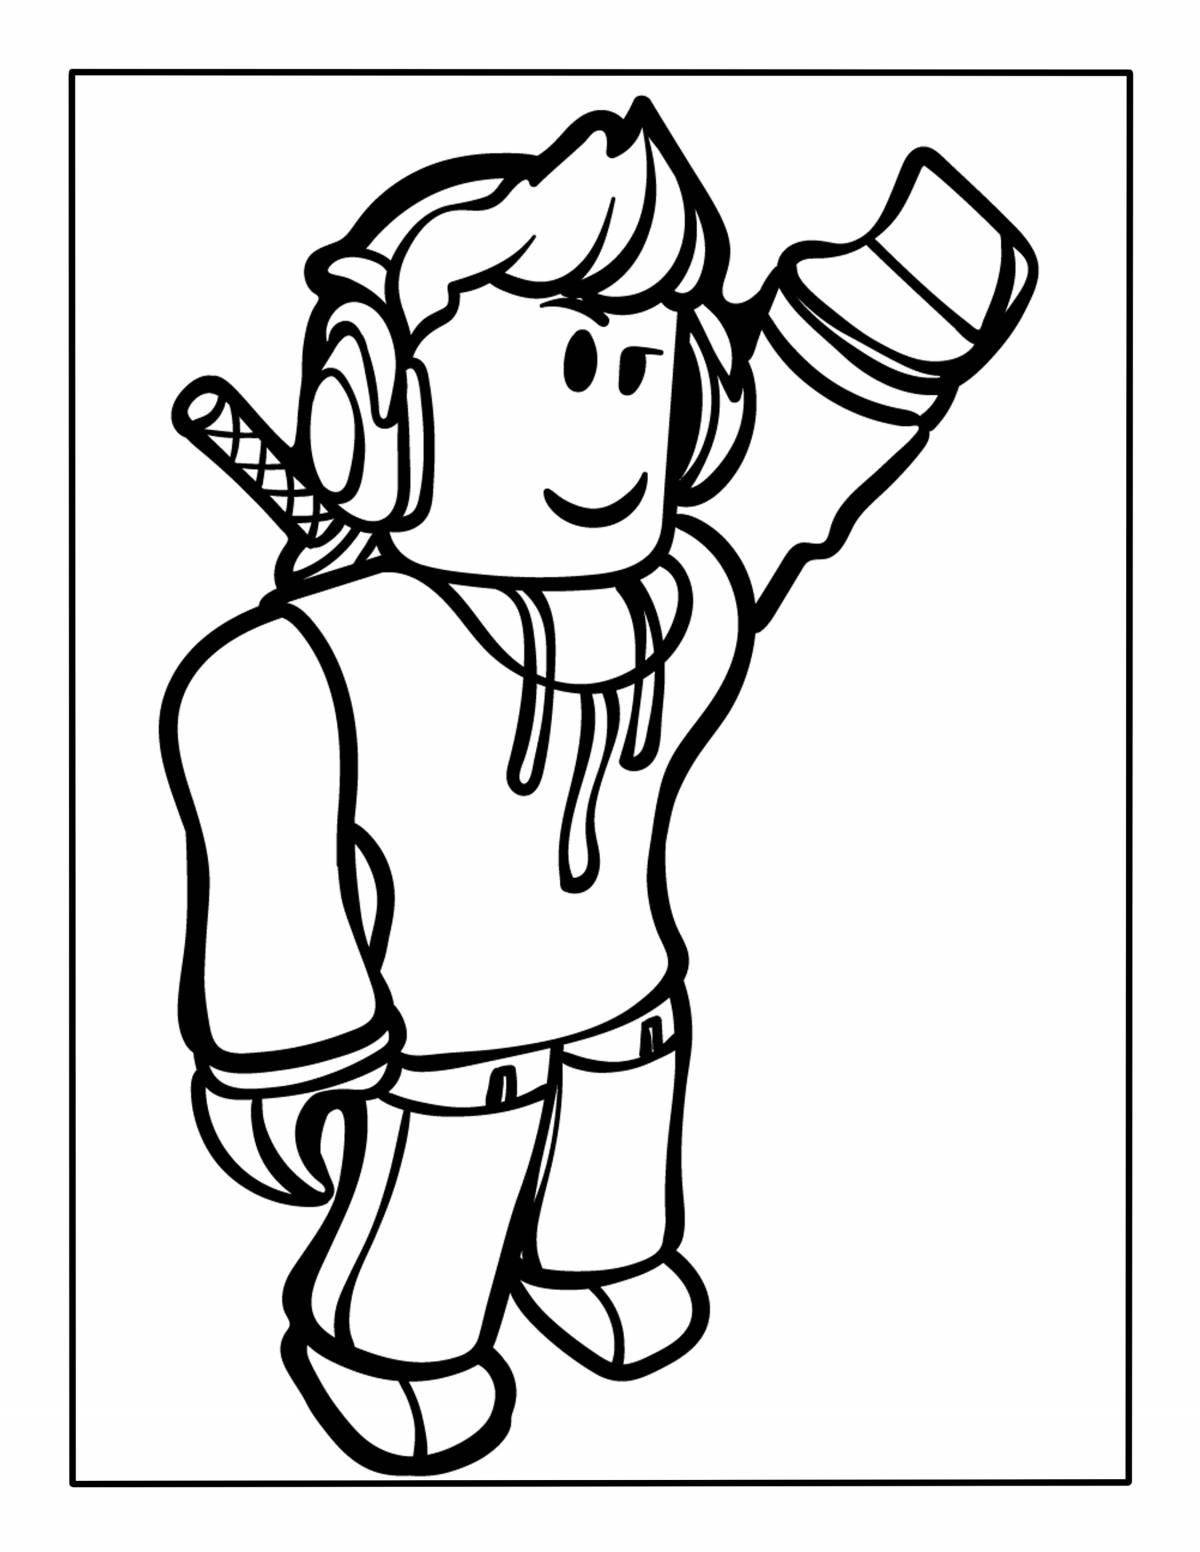 Playful roblox marder mystery 2 coloring page